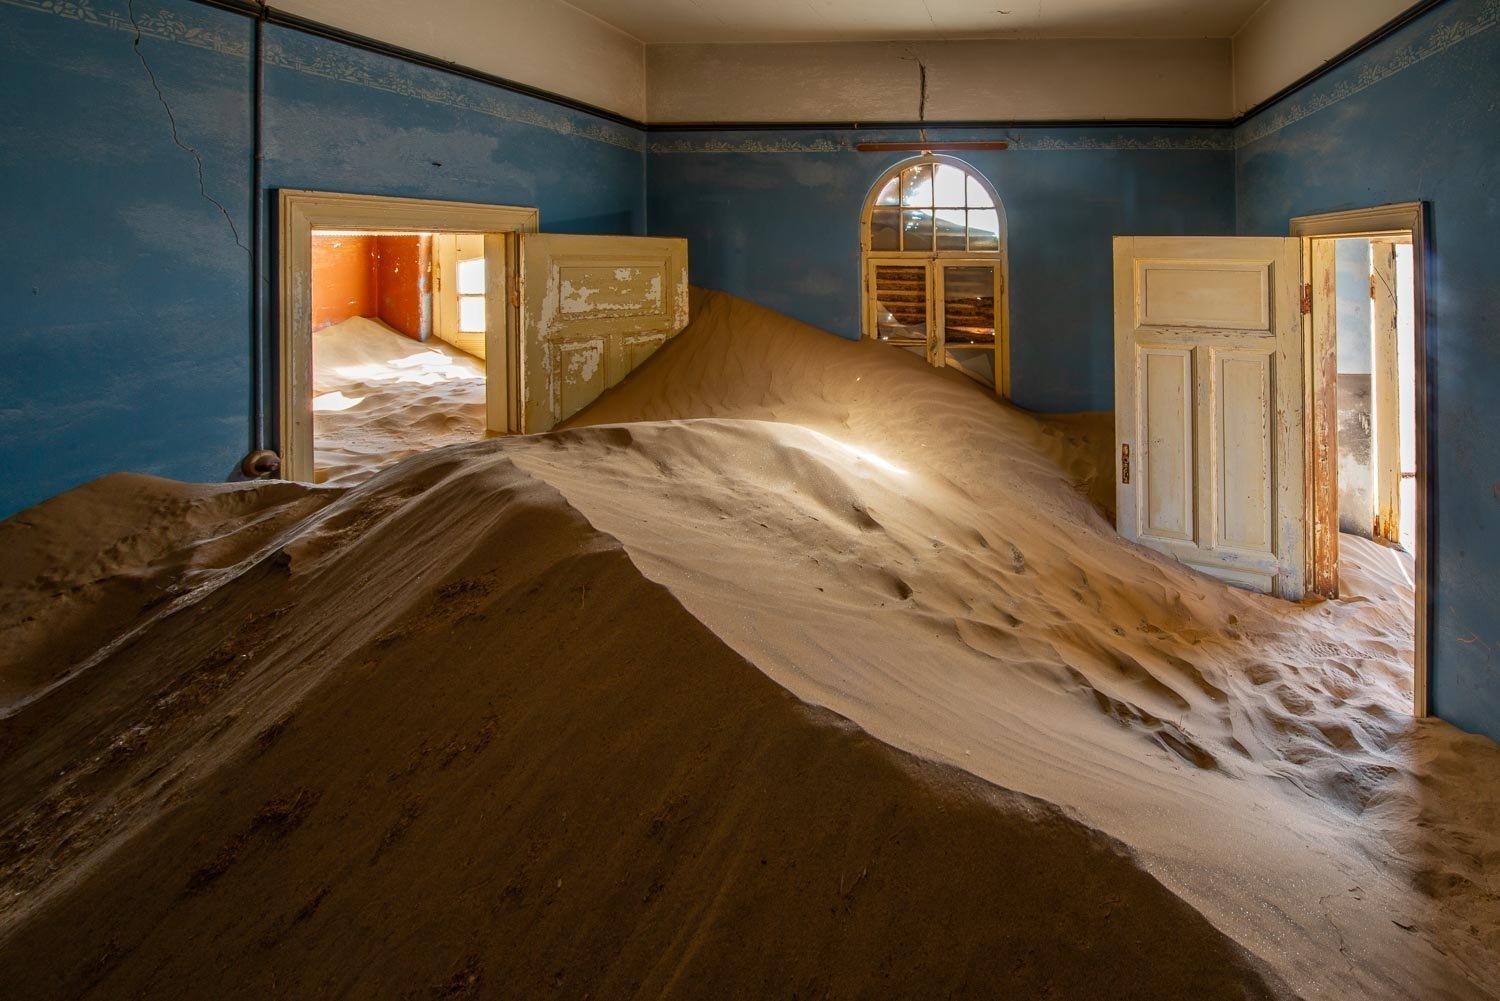 Making of a house room with a lot of construction sand inside, Kolmanskop #26